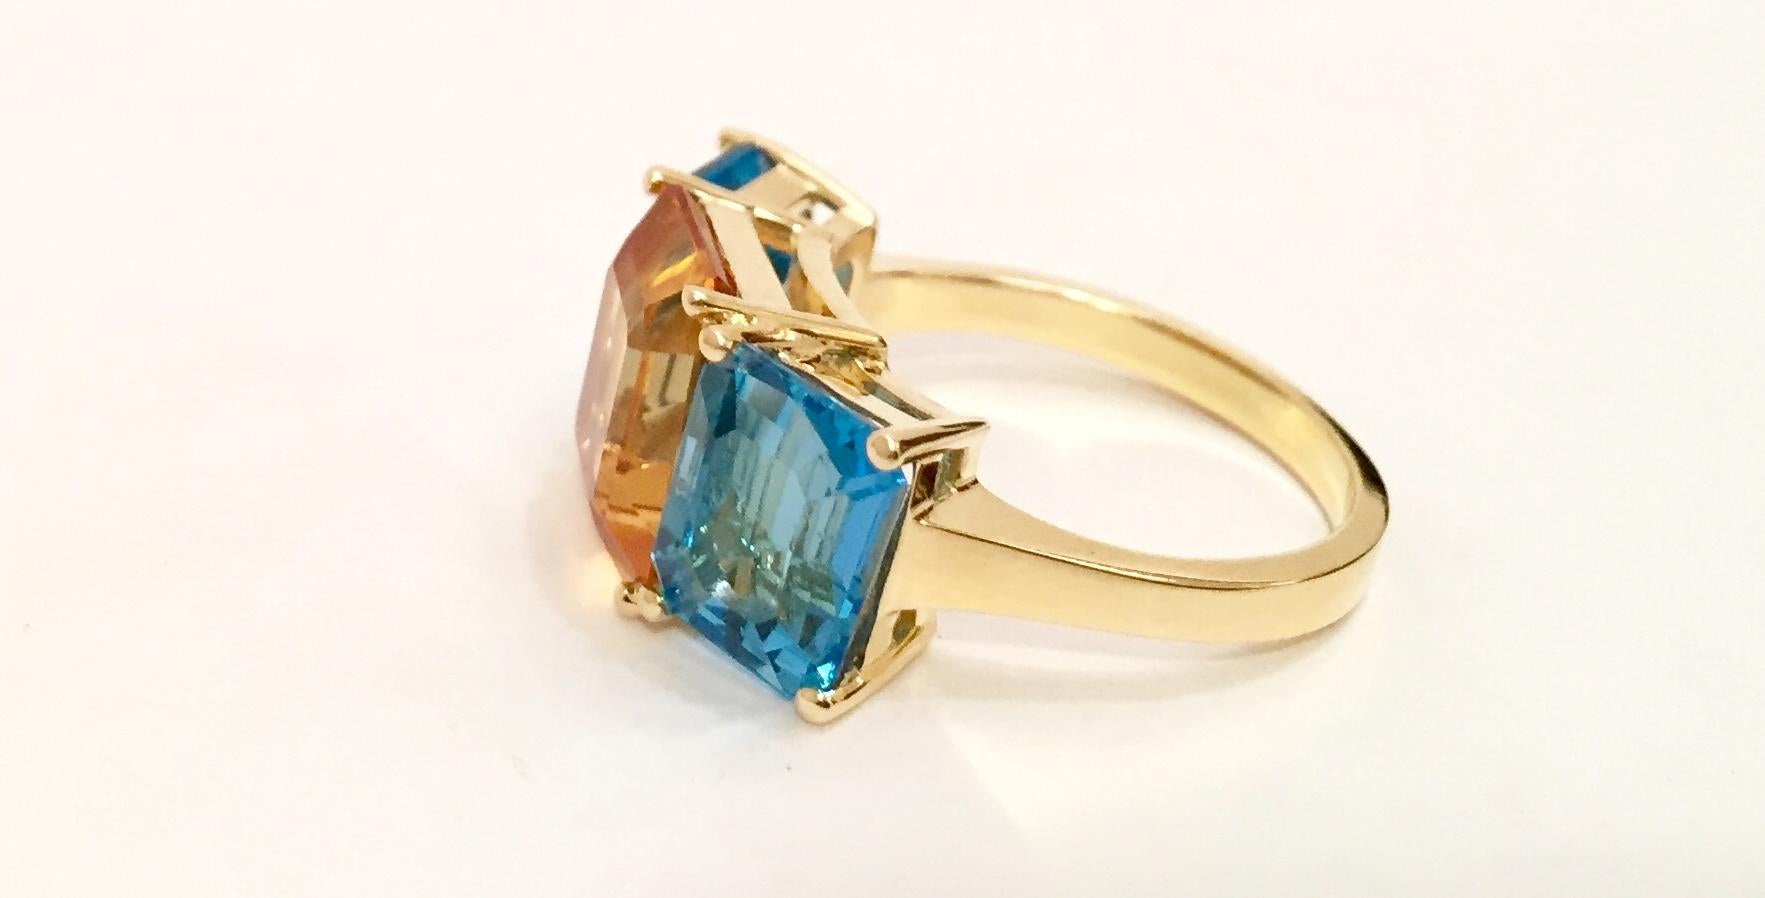 Contemporary 18 Karat Yellow Gold Mini Emerald Cut Ring with Orange Citrine and Blue Topaz For Sale